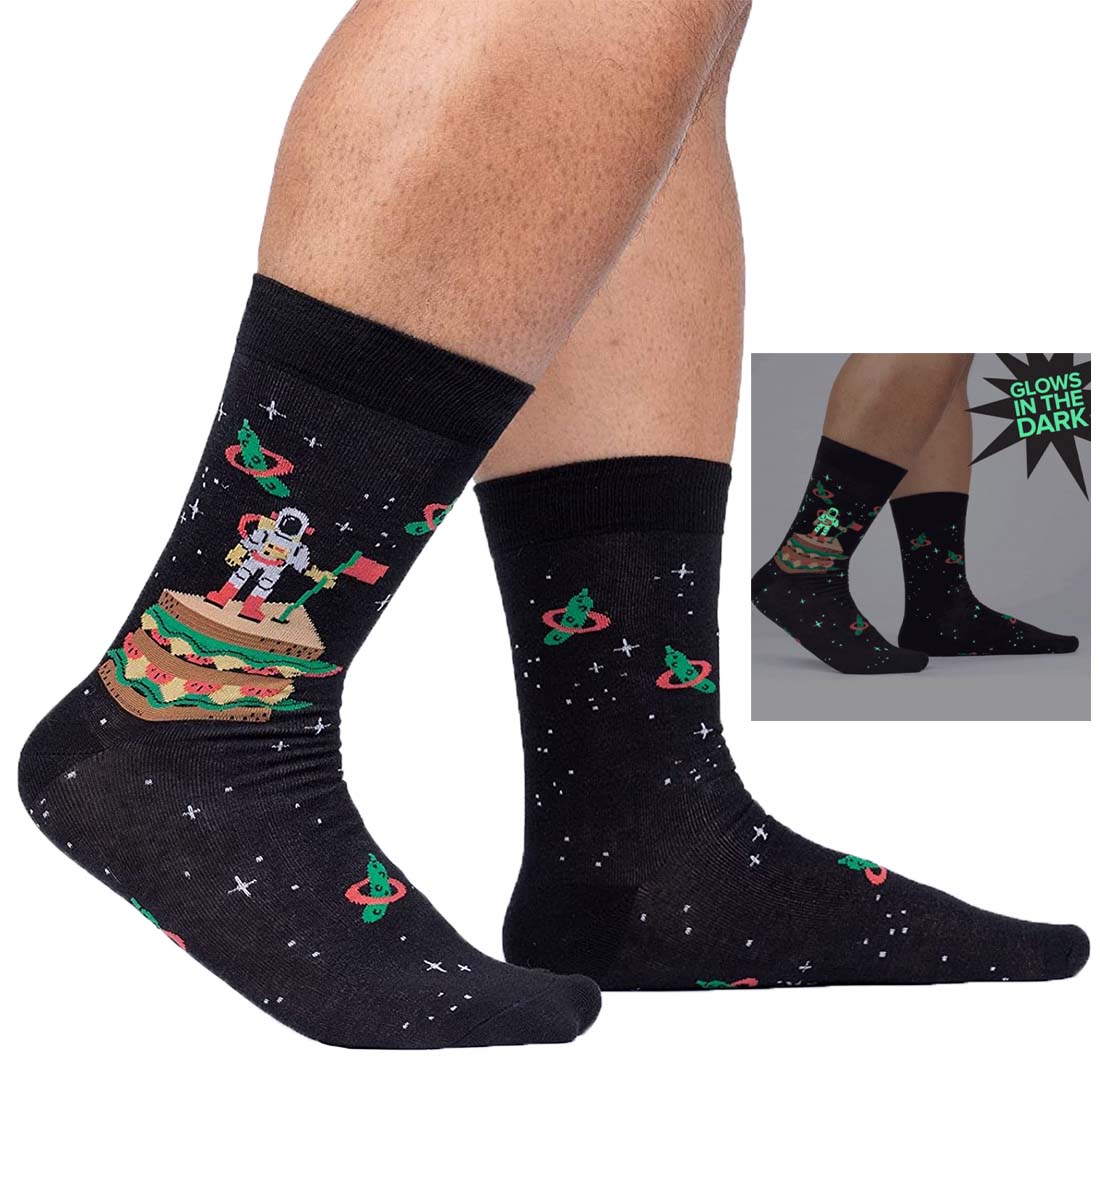 SOCK it to me Men's Crew Socks (mef0532),The Moon Club - The Moon Club,One Size